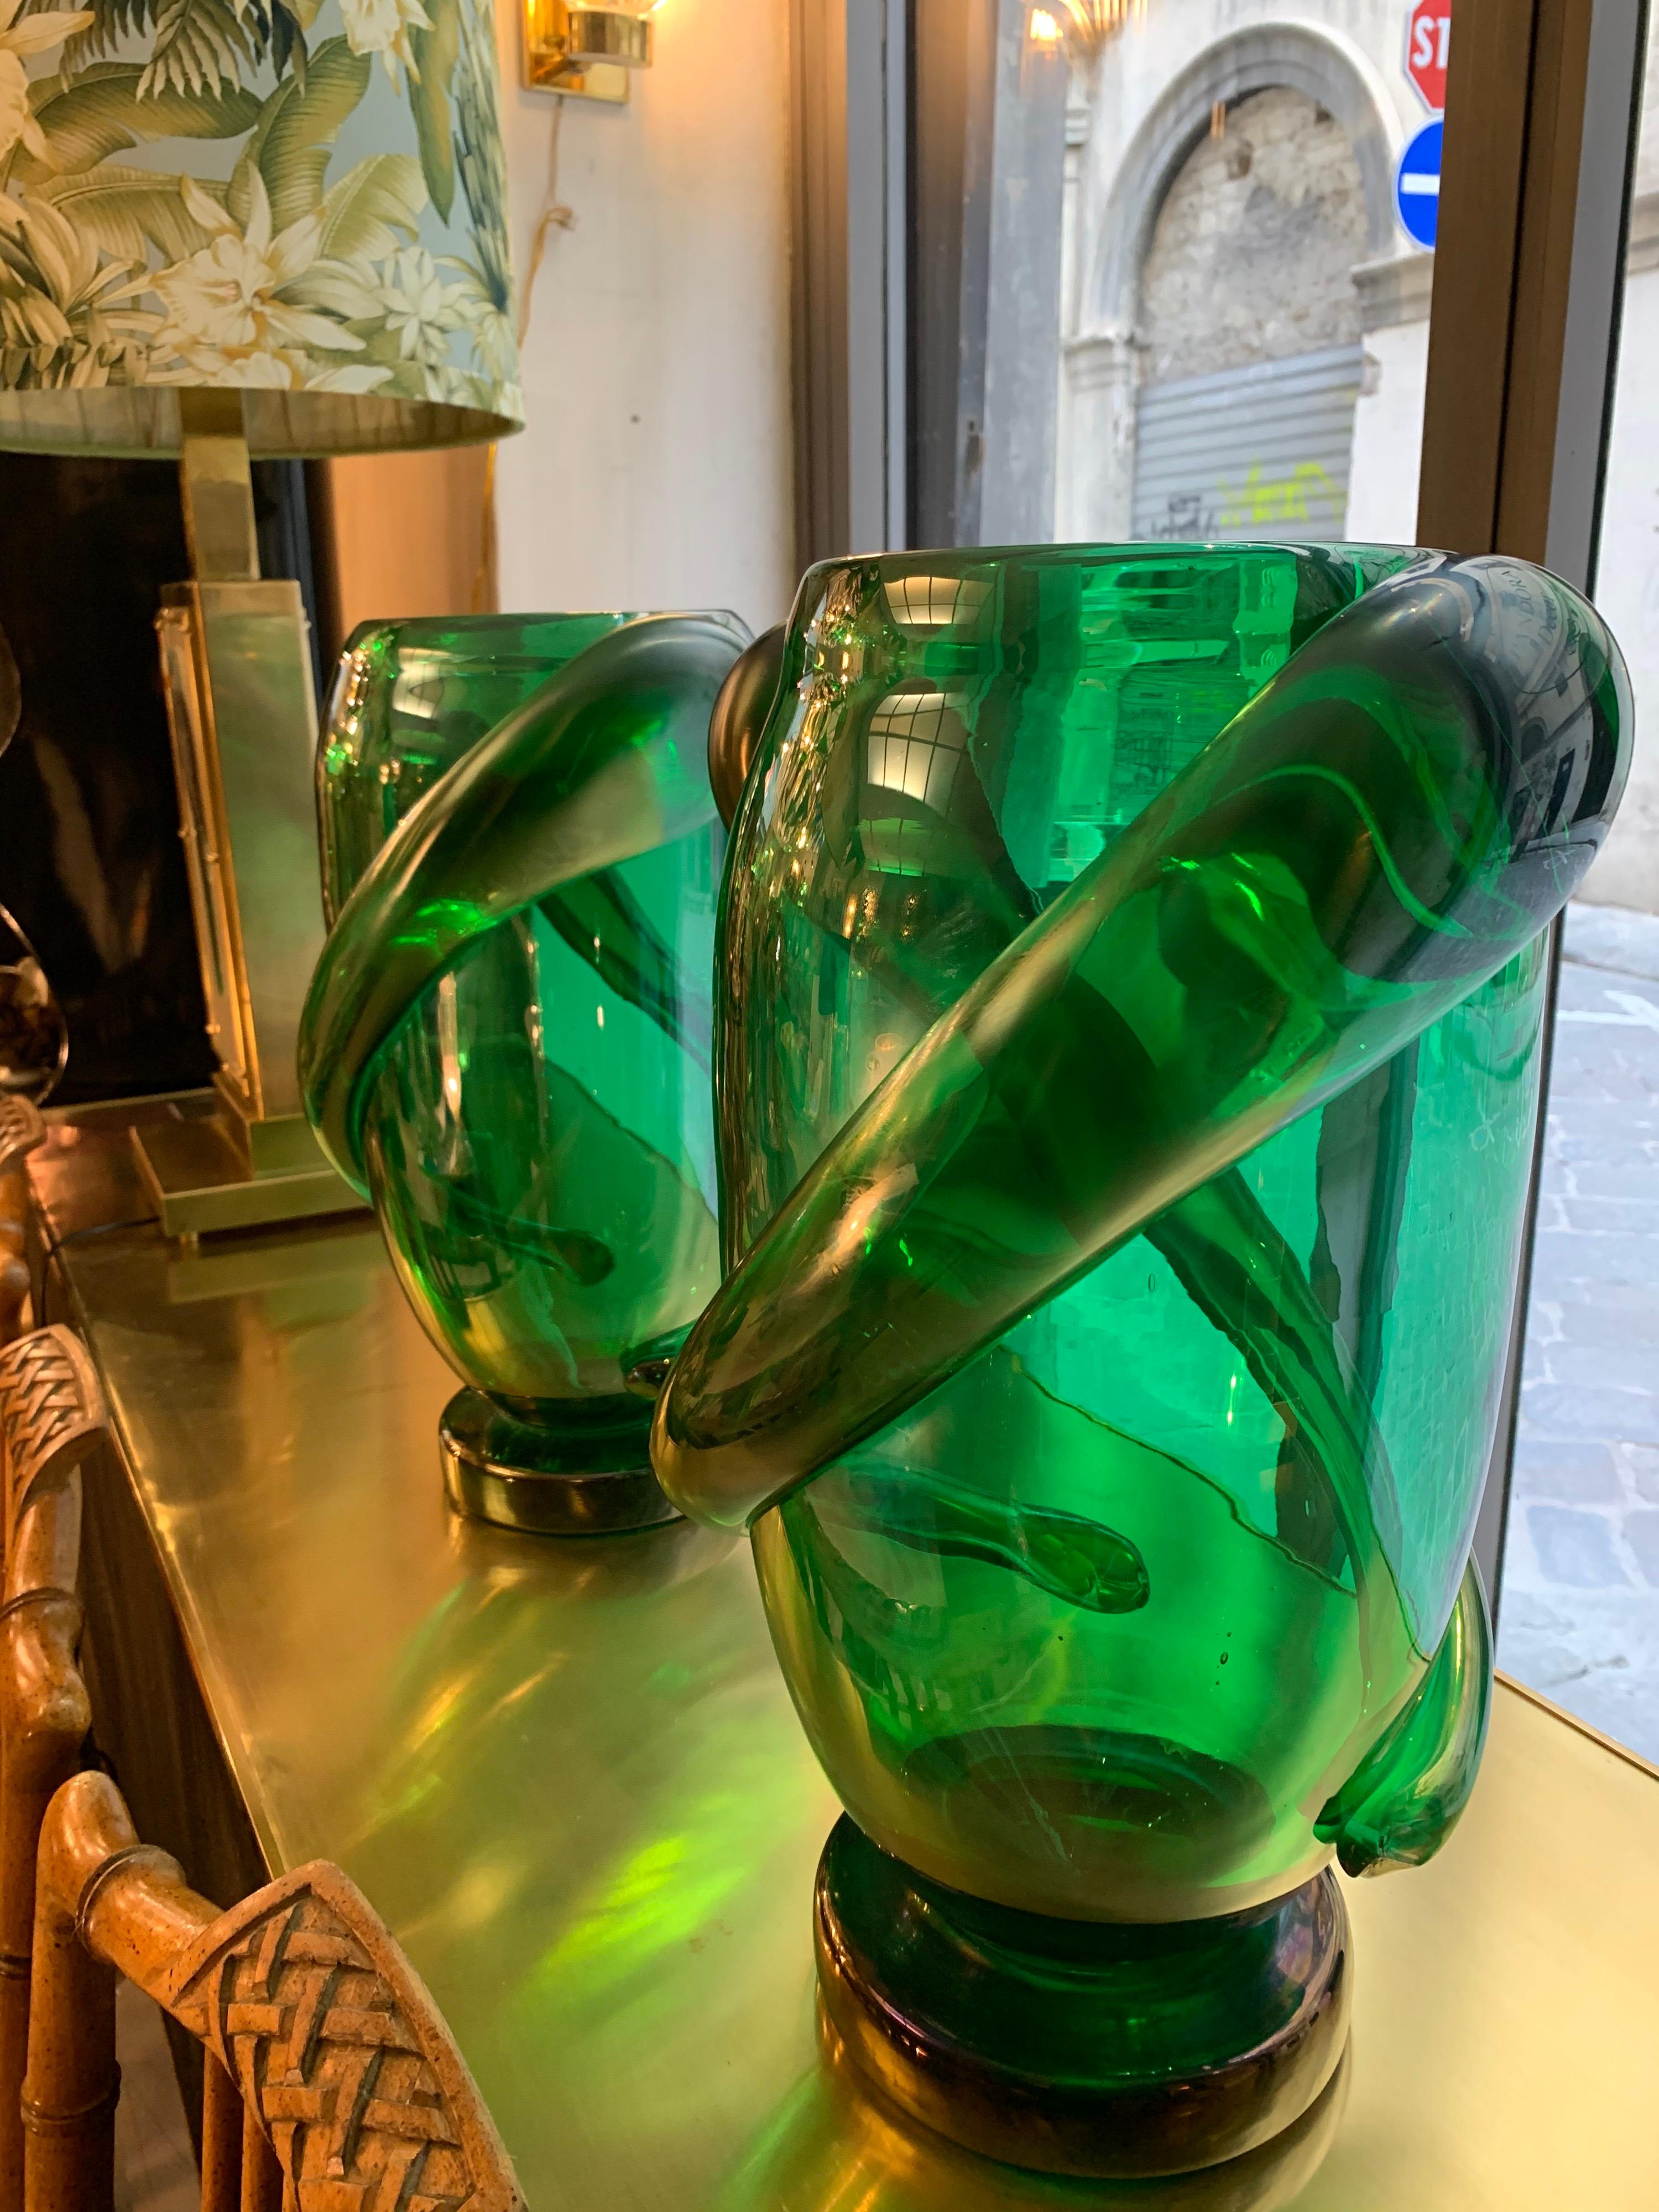 Pair of green Murano glass hand blown vases signed by Costantini.
The body of the vase is decorated with spiral freeform iridescent reliefs.
Can be sold individually.